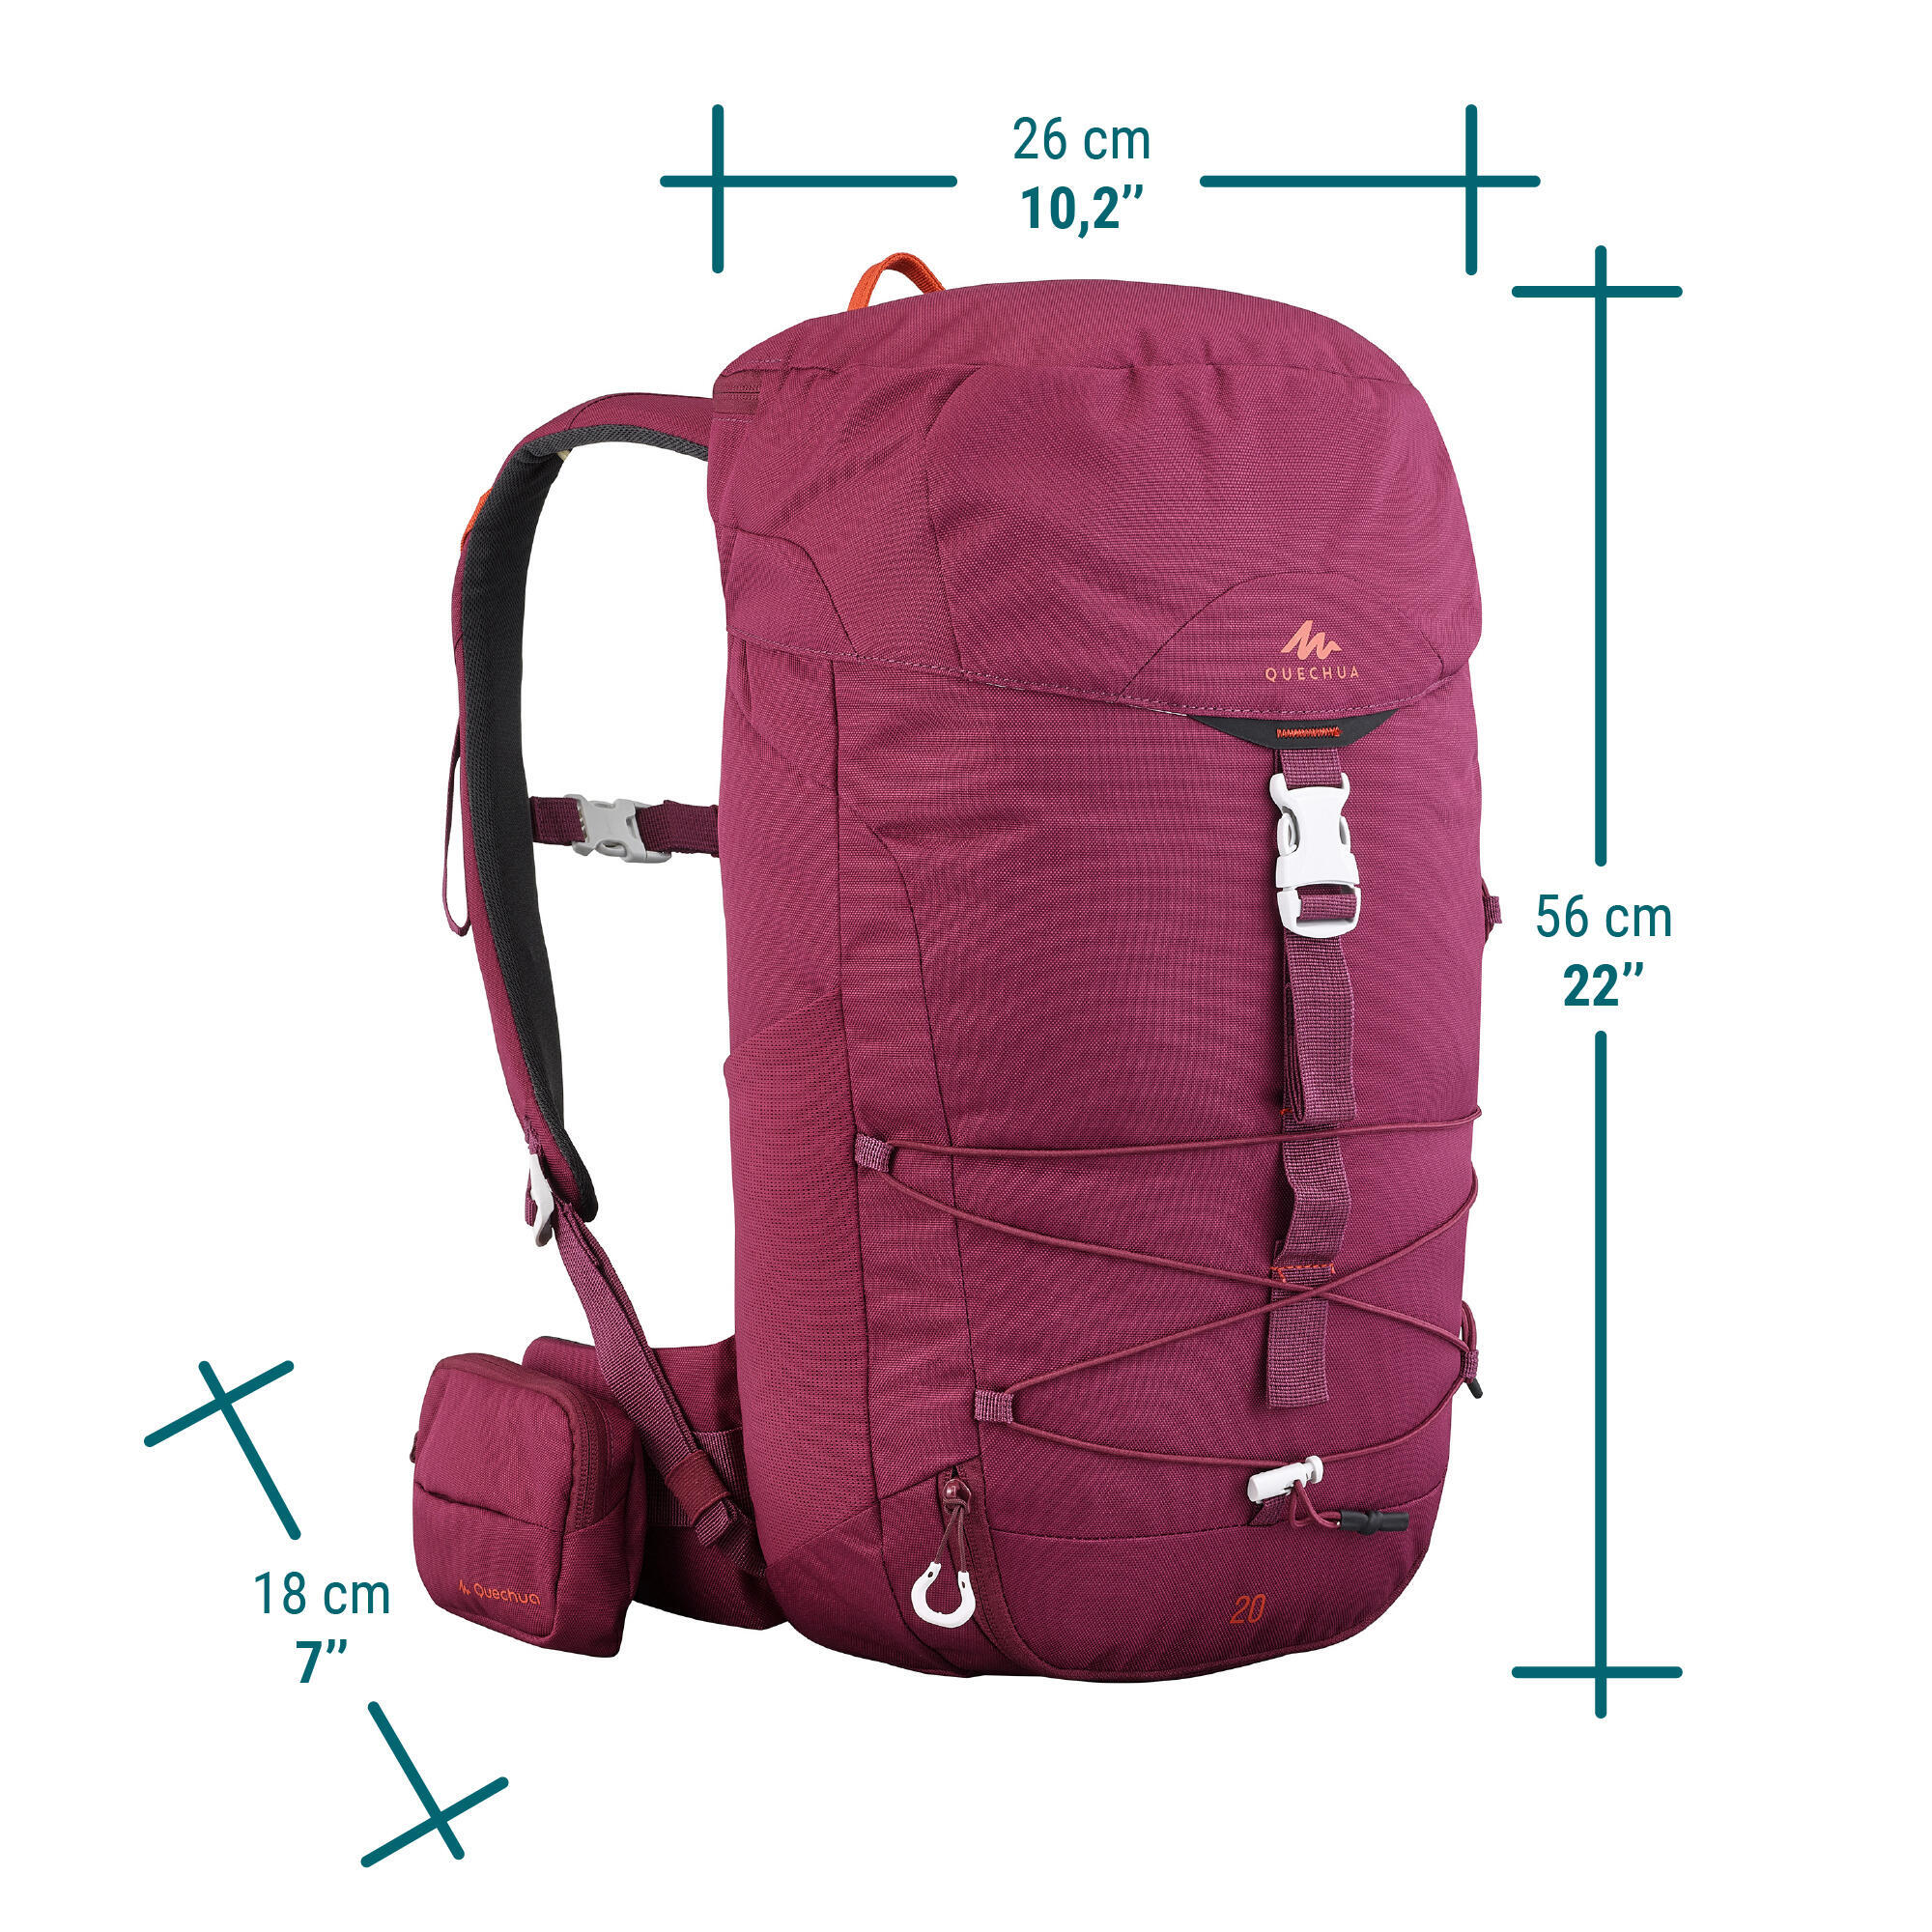 Mountain hiking backpack 20L - MH100 3/15